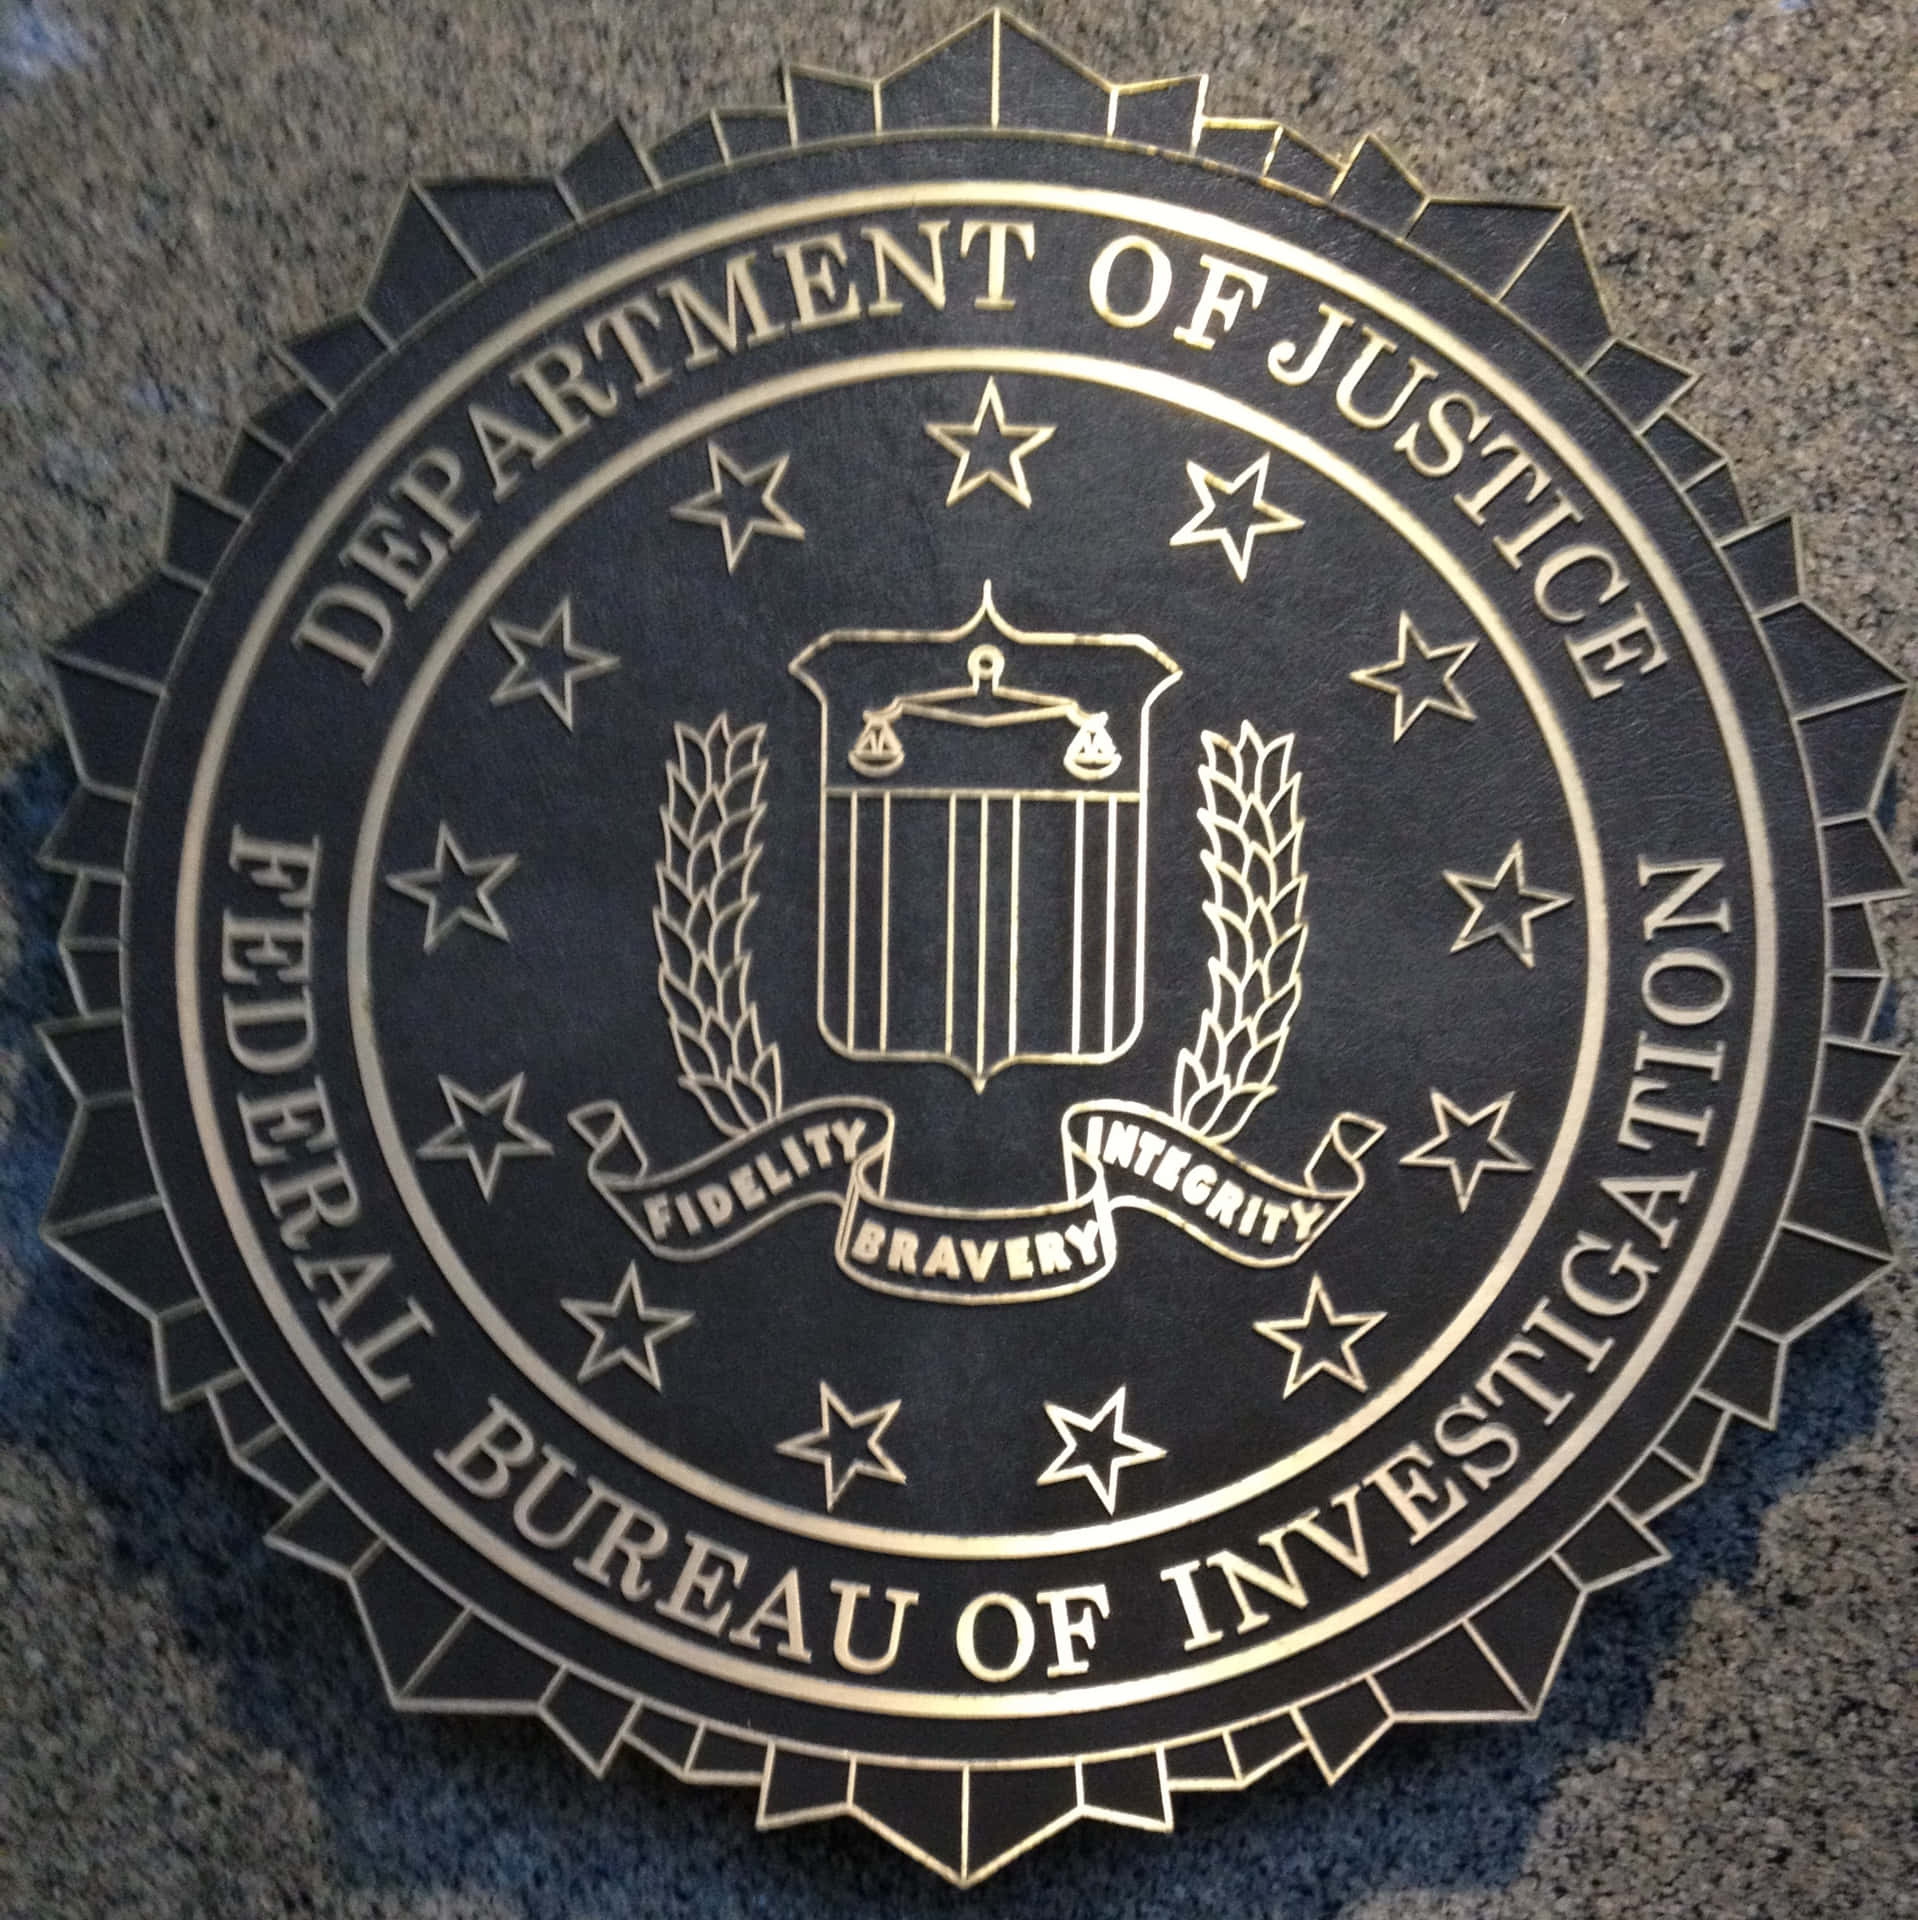 The Fbi Seal Is Shown On The Wall